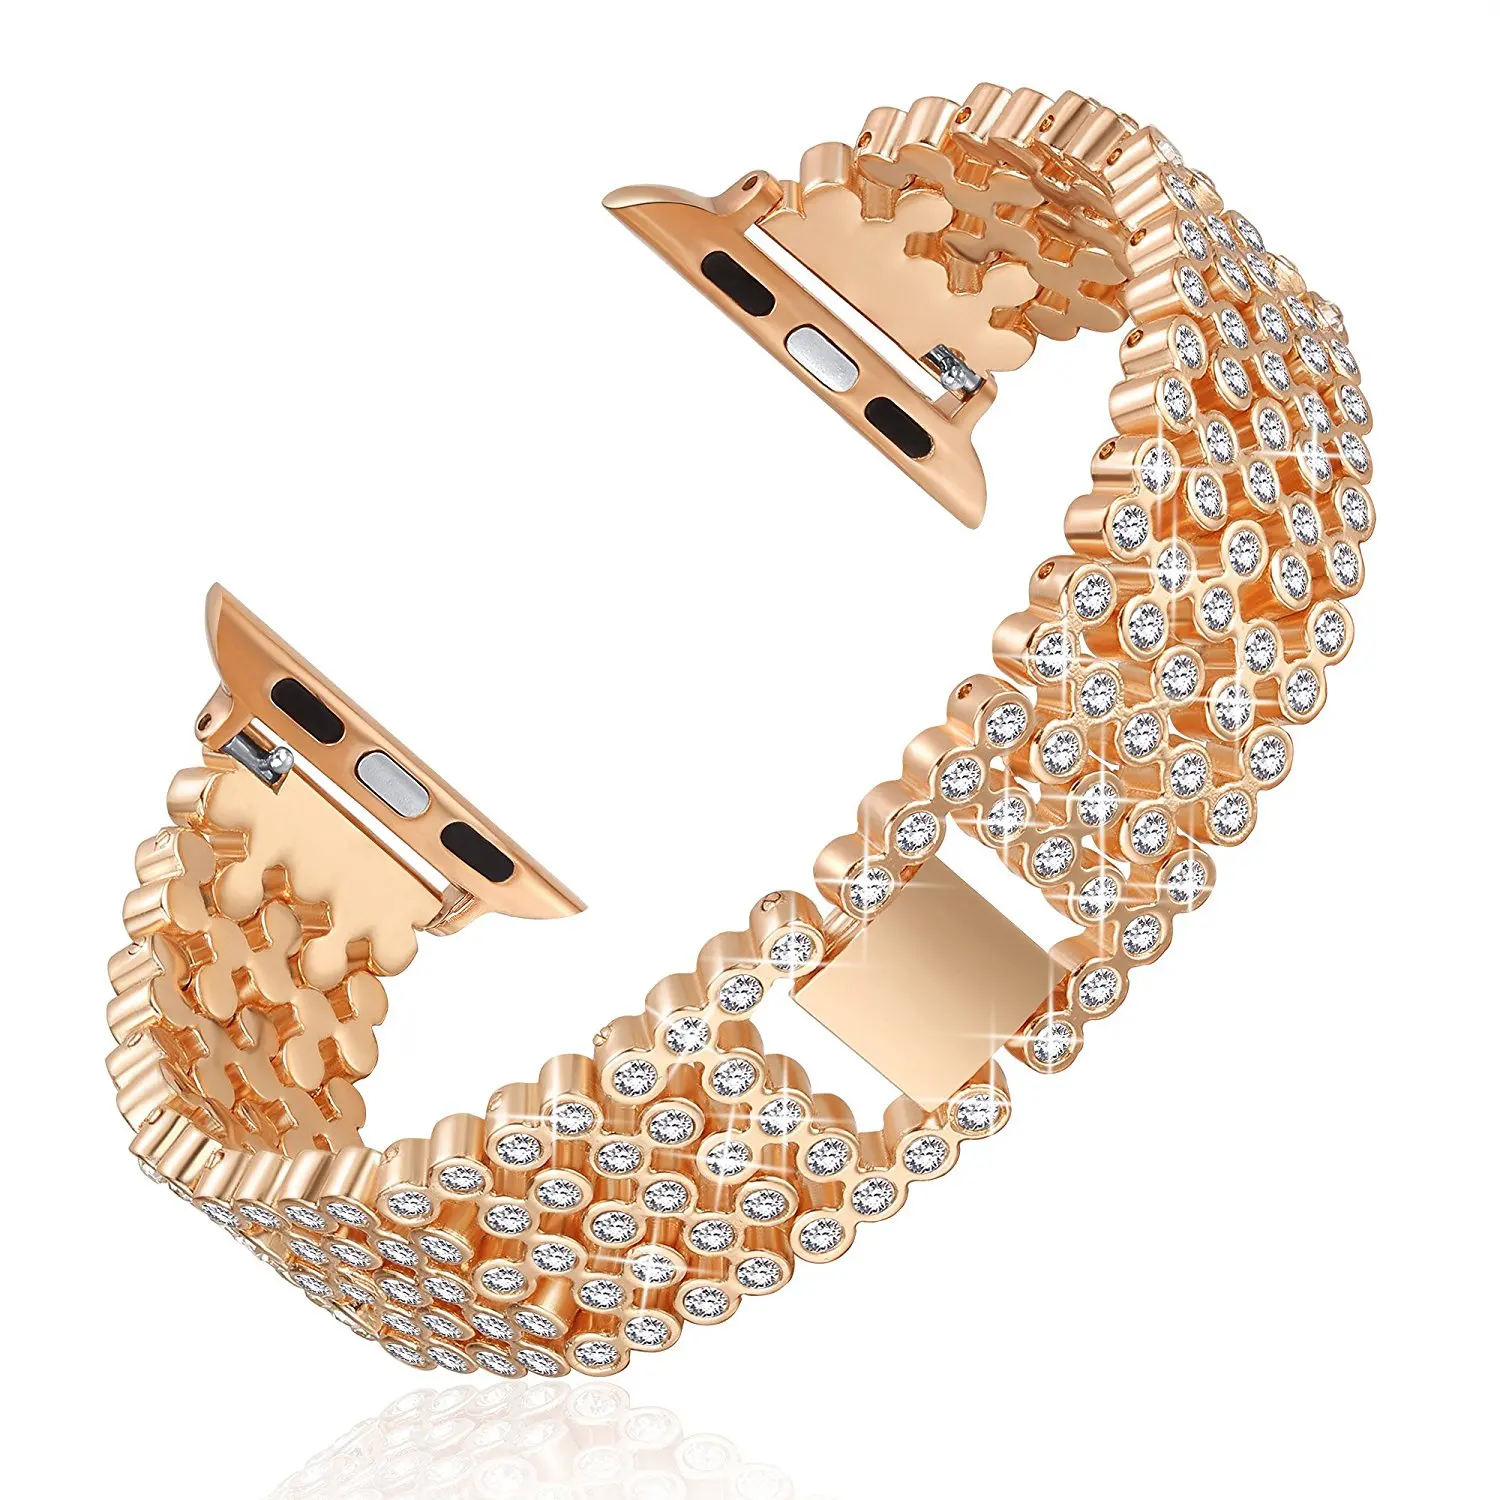 Luxury Diamond Rhinestone Bling Strap For Apple Watch Band 38mm 42mm Stainless Steel Metal Bracelet For iWatch 5 6 SE 40mm 44mm